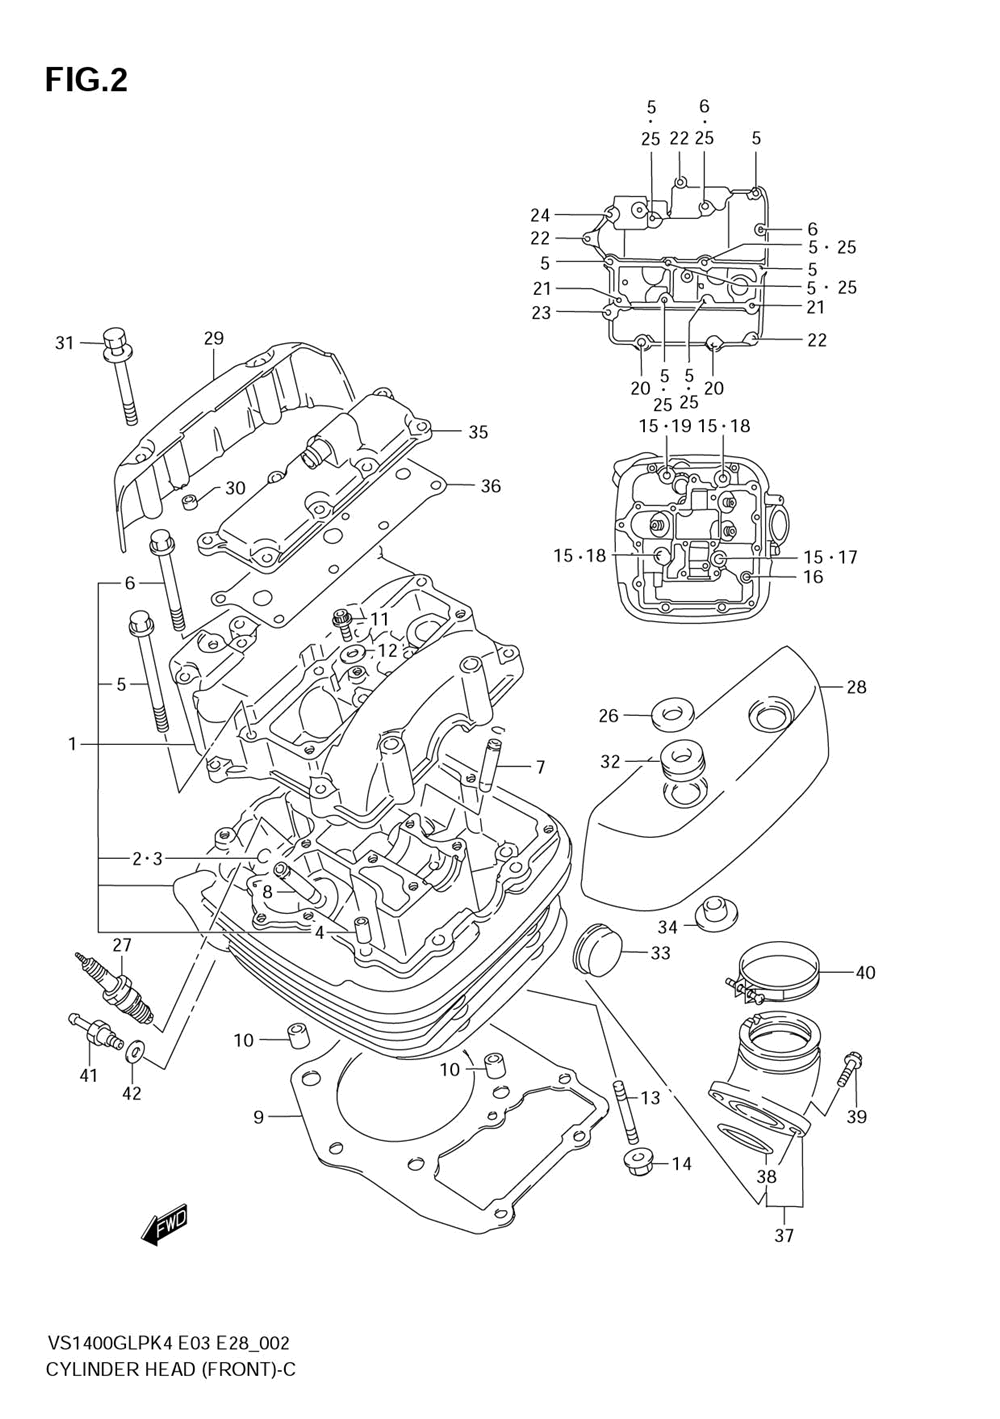 Cylinder head (front)